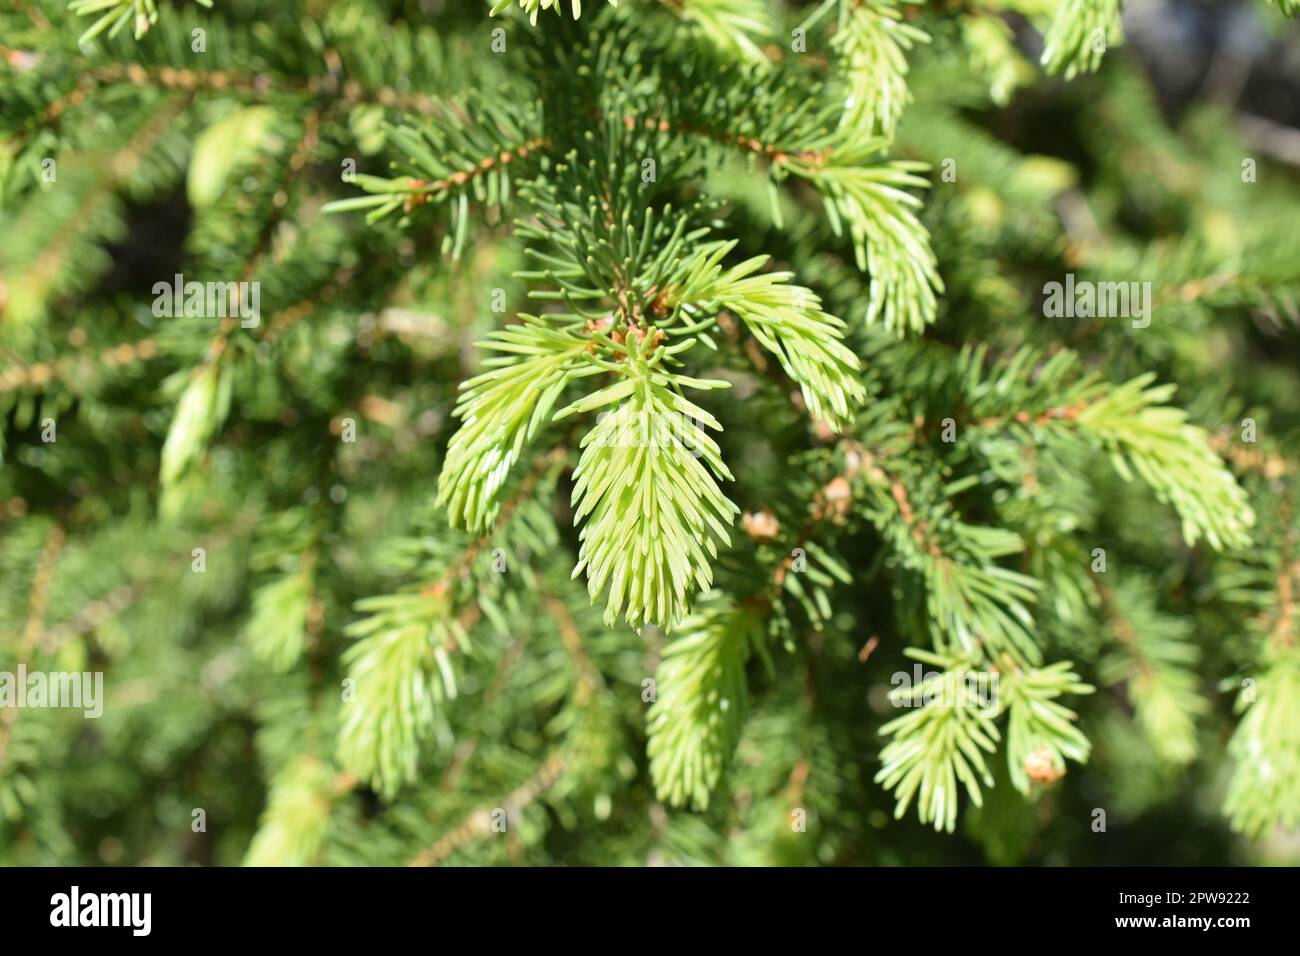 New intense green foliage on a spruce tree in spring Stock Photo